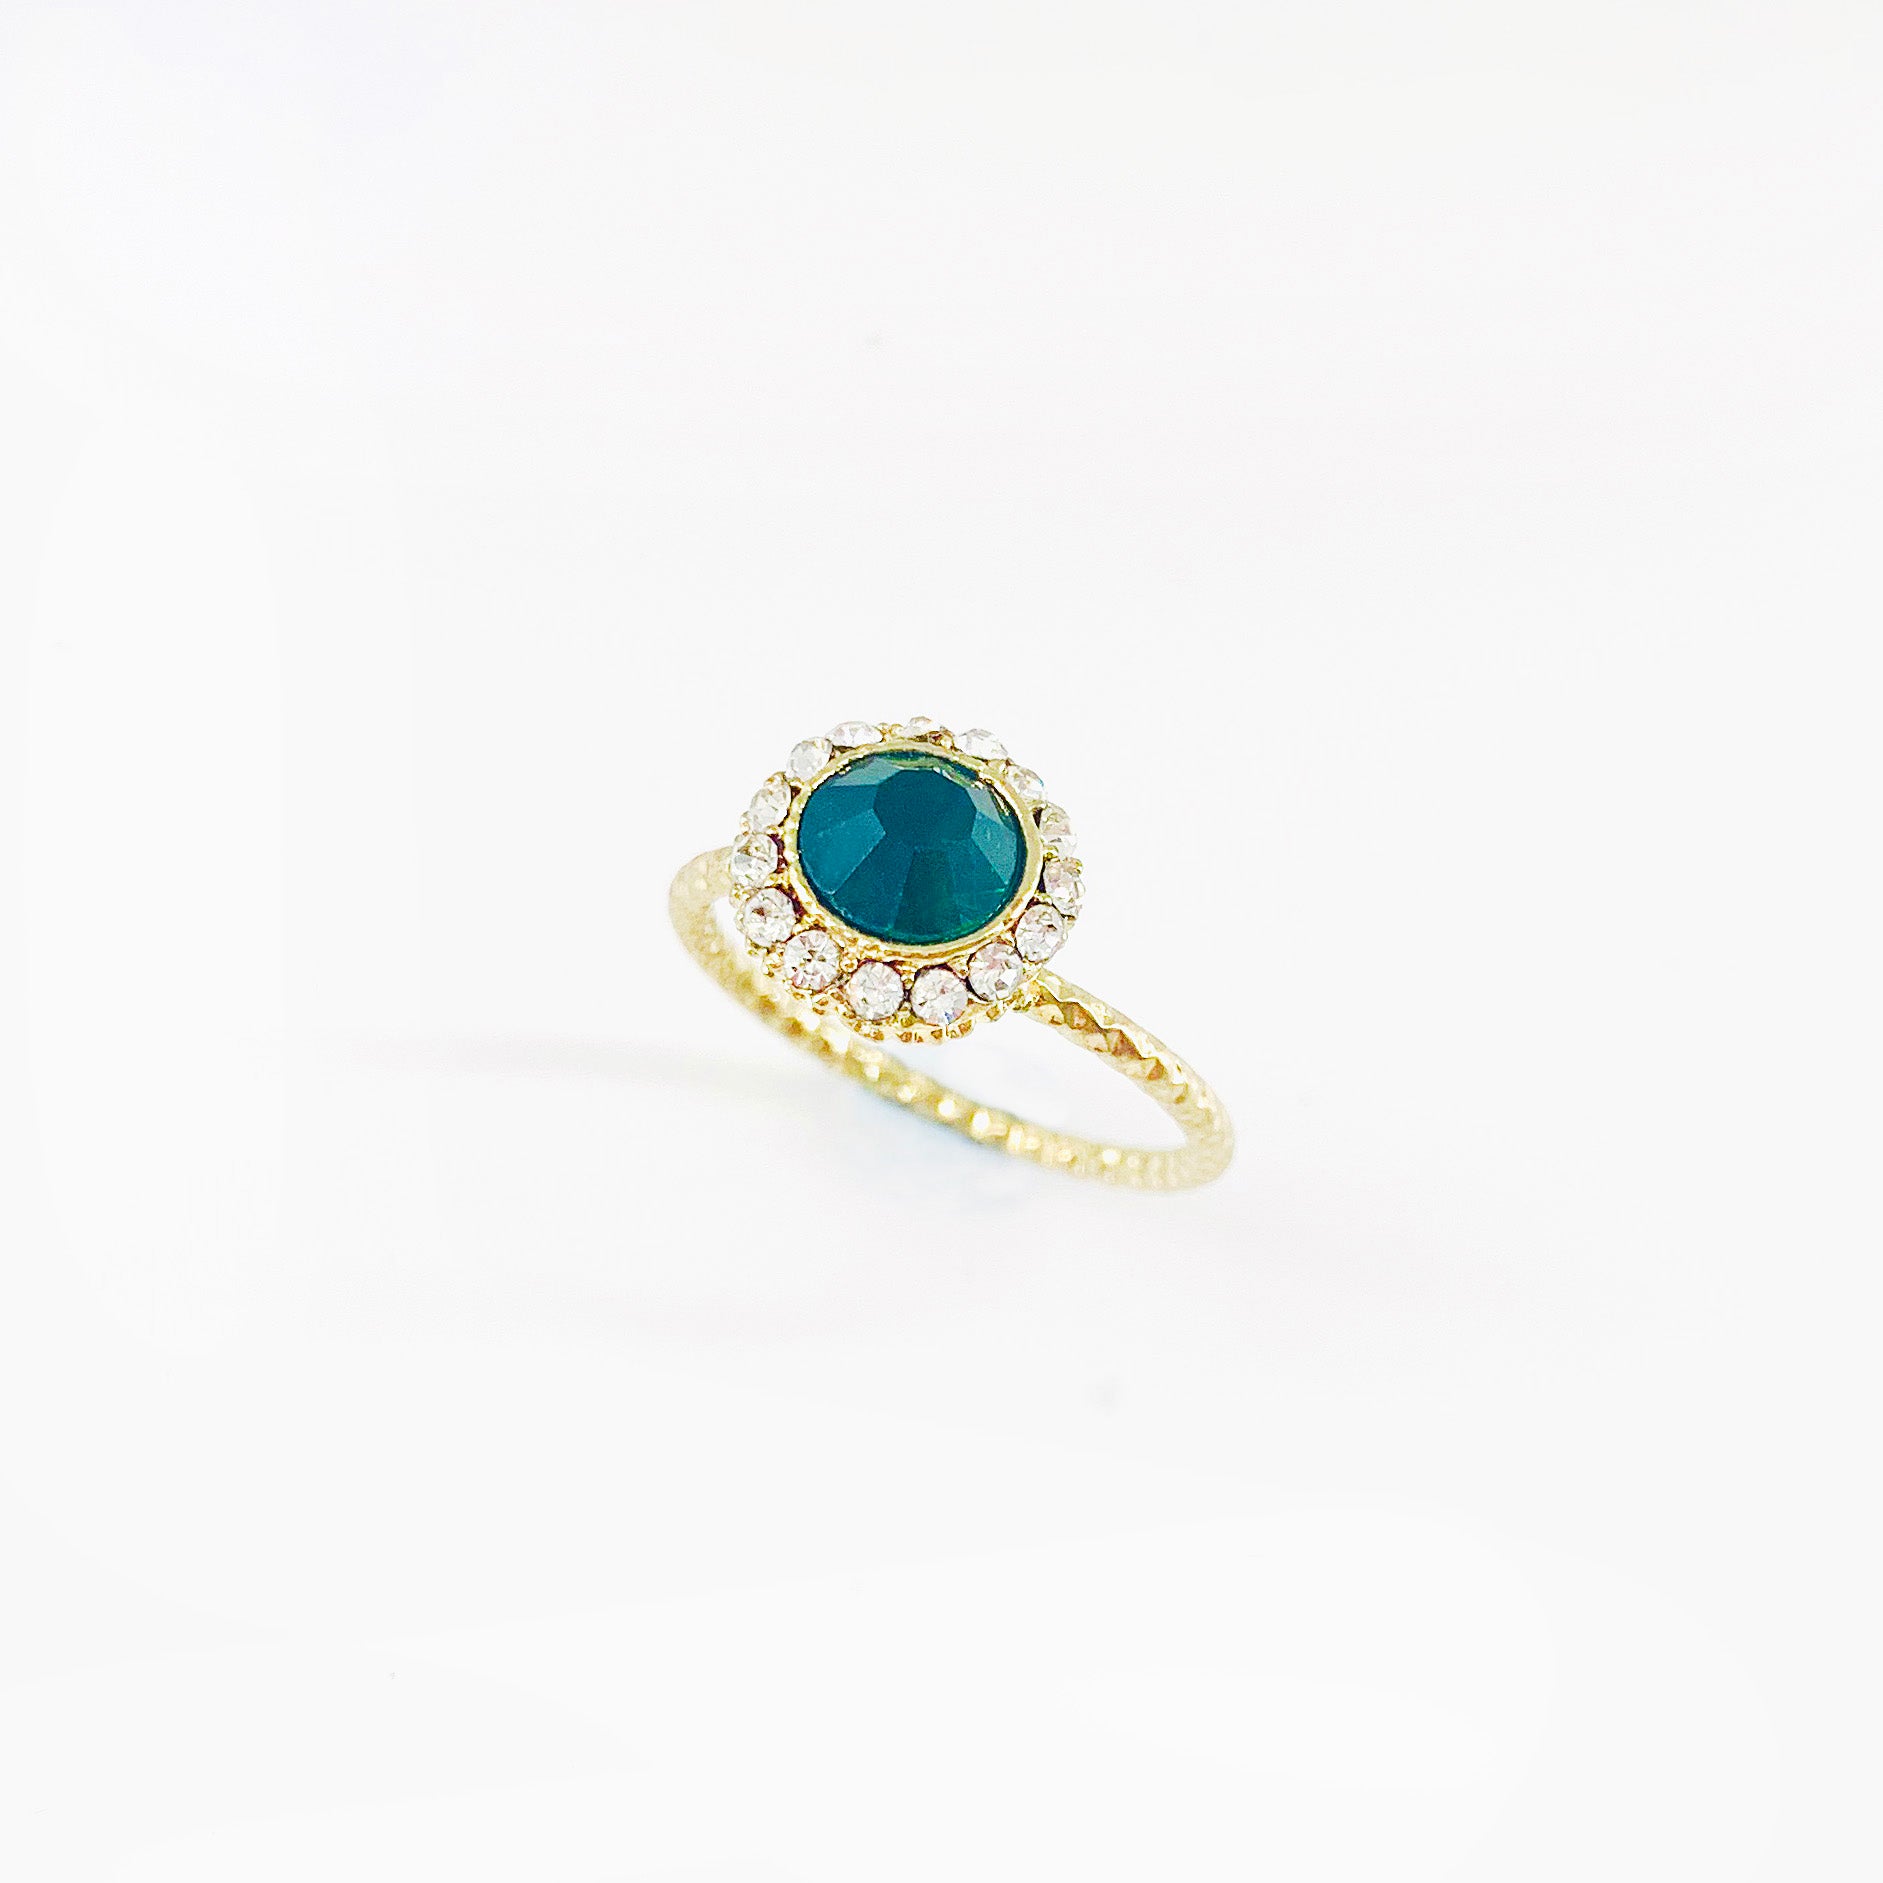 Emerald coloured crystal with diamante stones on textured gold ring